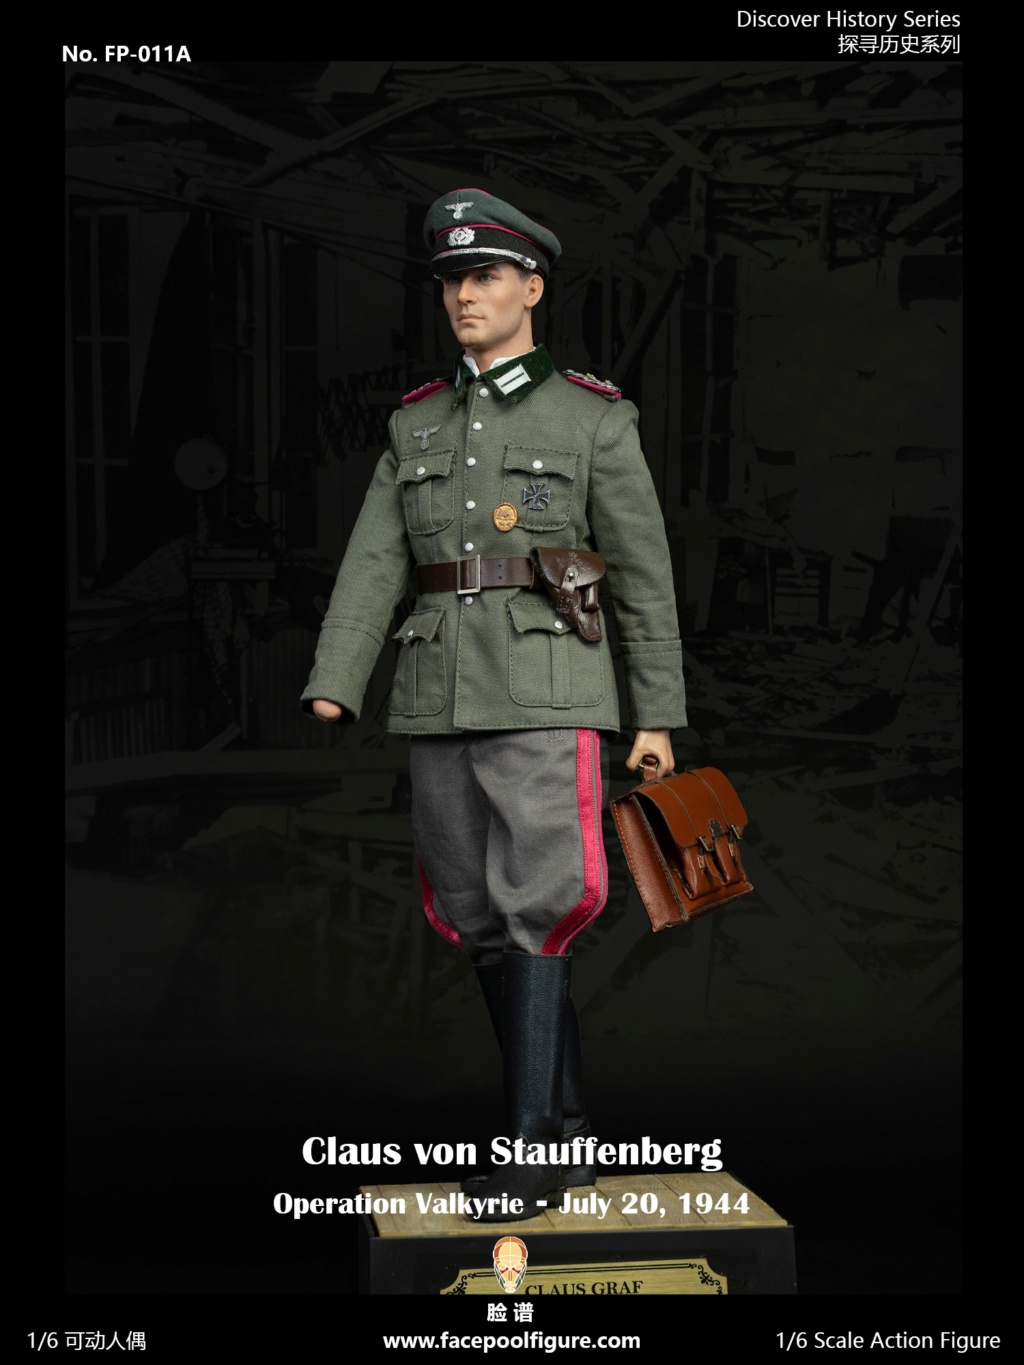 ClausvonStauffenberg - NEW PRODUCT: Facepool: 1/6 Exploring history series: Operation Valkyrie (accessories correction) 06465910